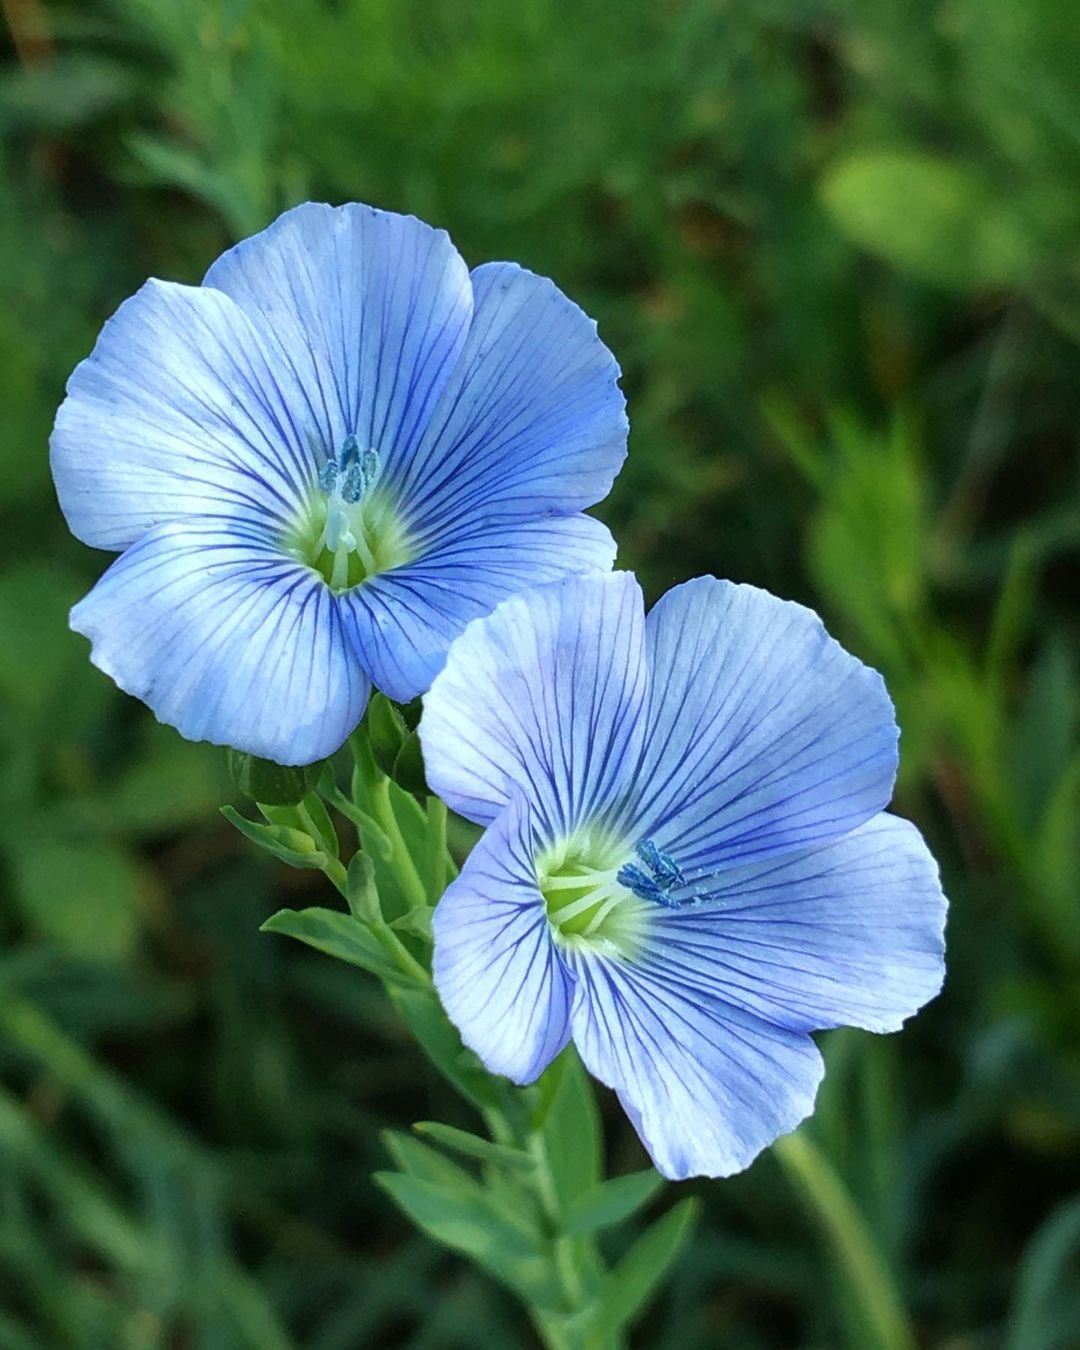 Two blue flax flowers blooming in the grass.